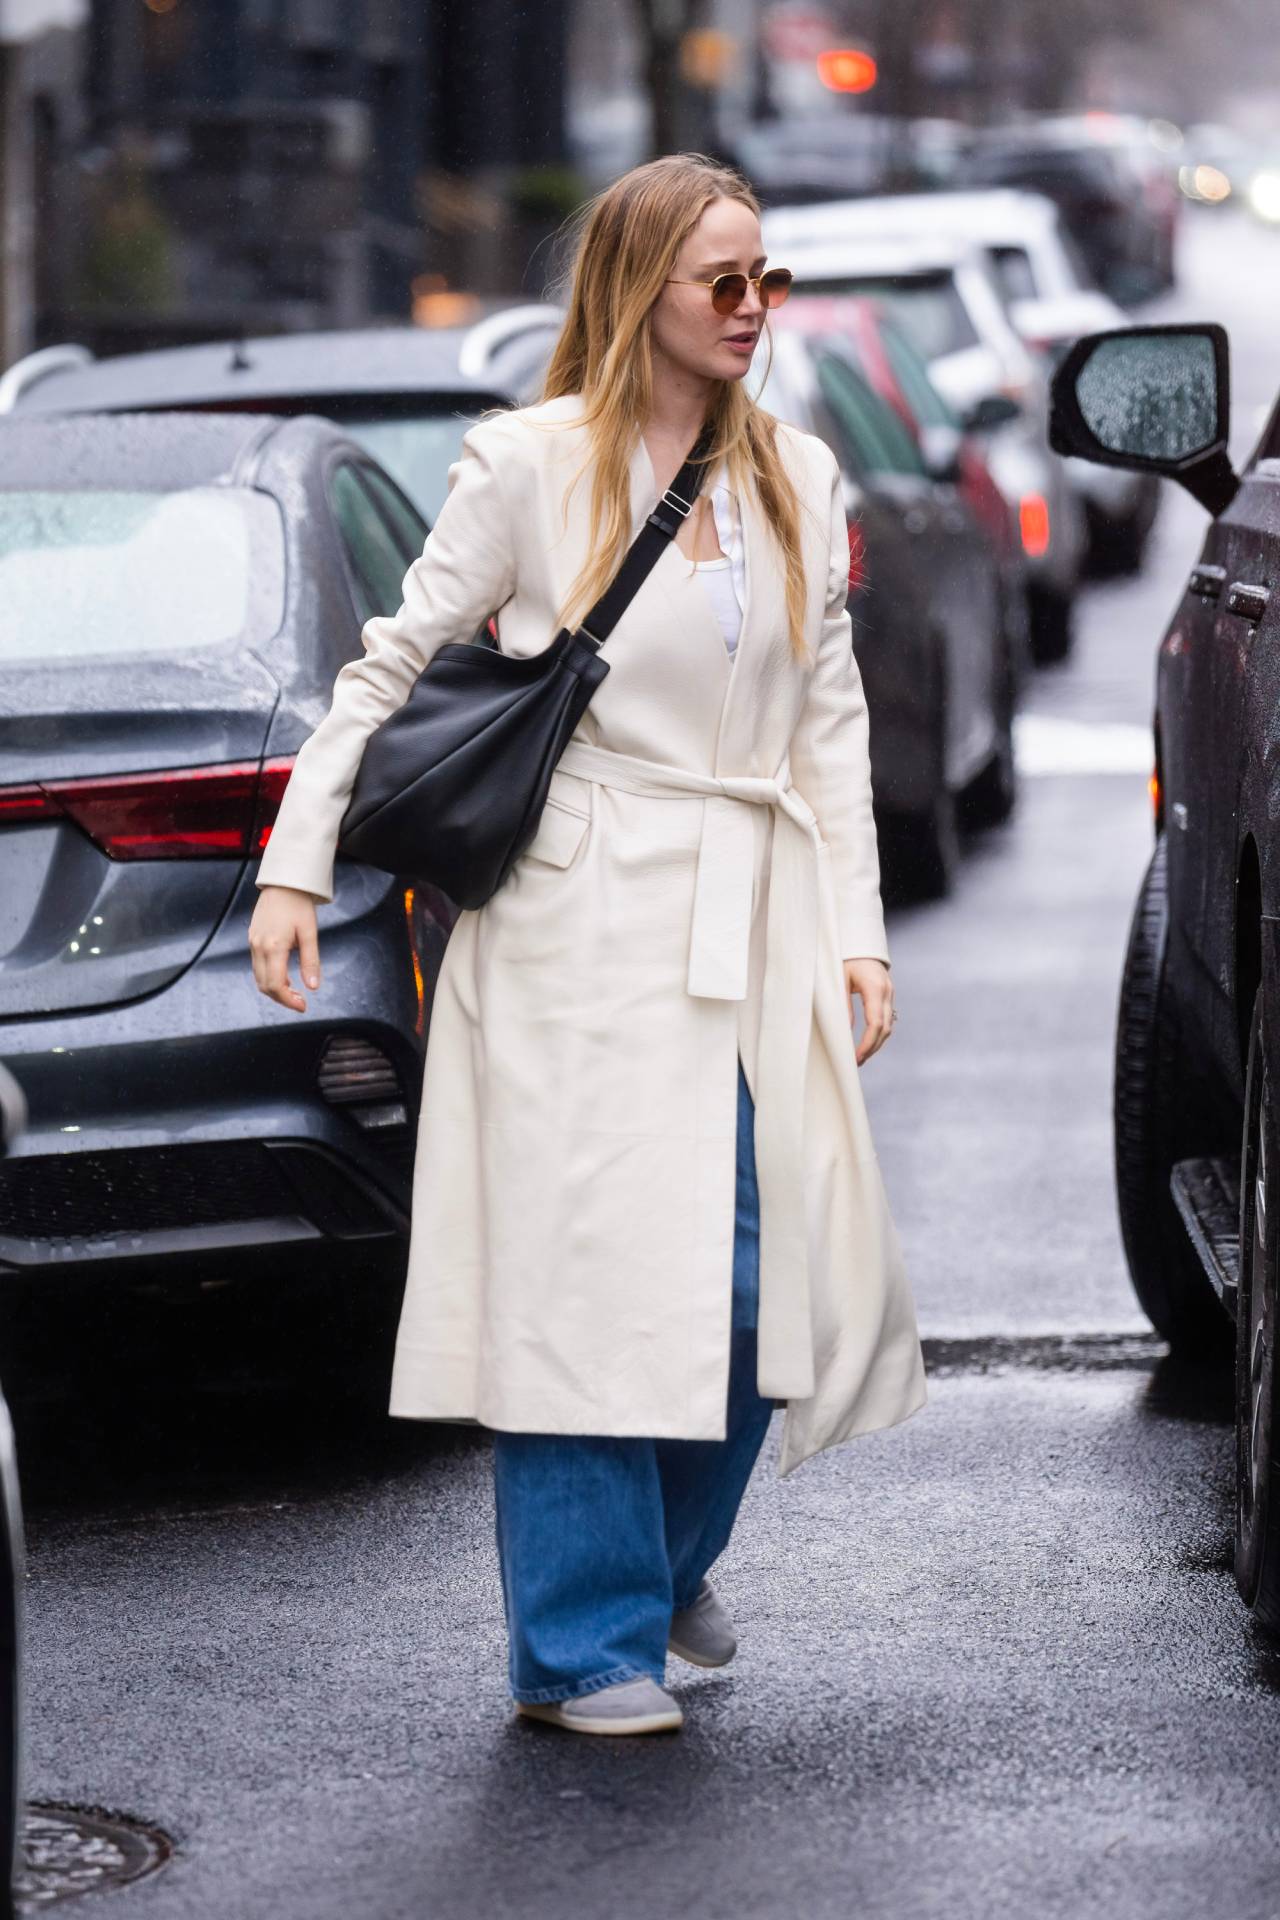 Jennifer Lawrence’s Style Off-Duty Is Where Her Fashion Really Shines ...